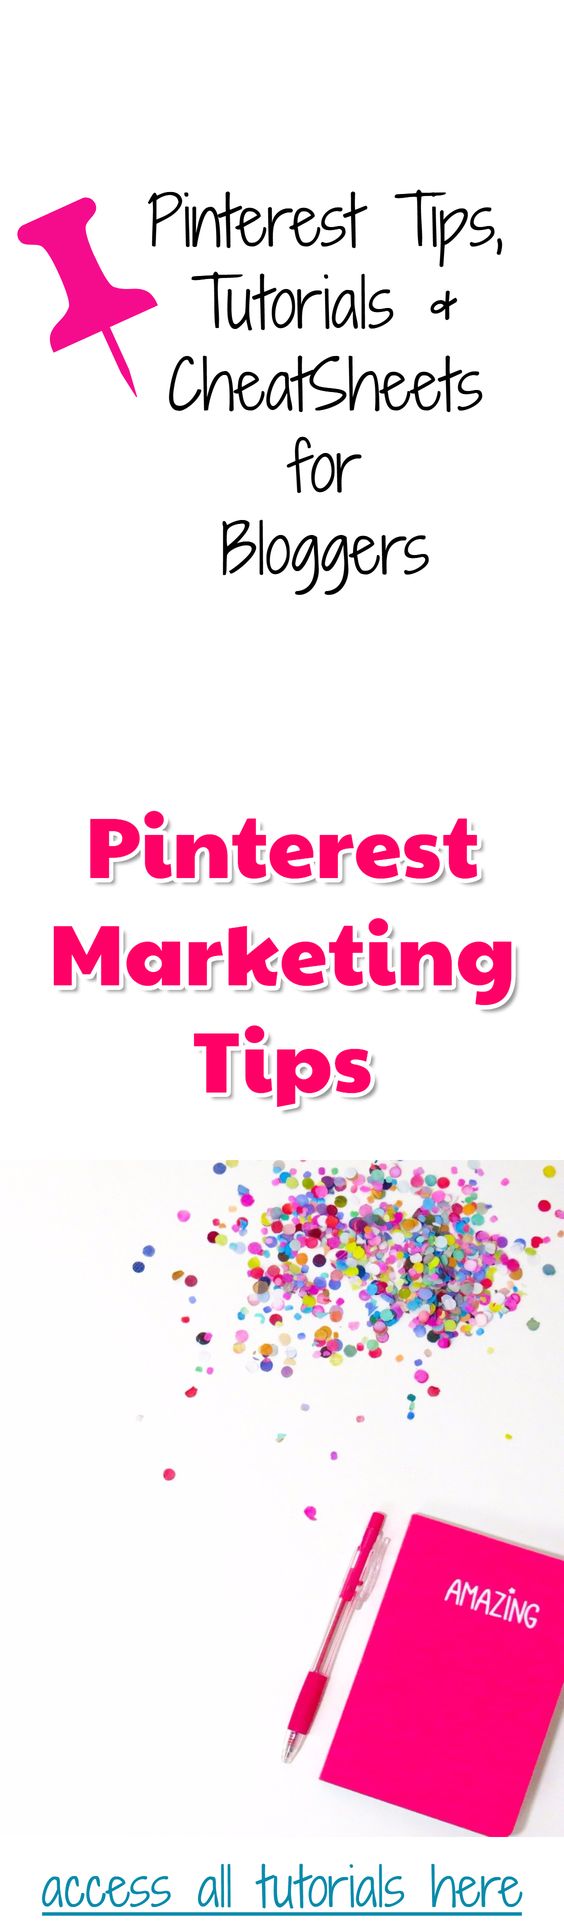 Pinterest Marketing resources for bloggers. Learn the best Pinterest marketing tips and tricks, get Pinterest tutorials, learn Pinterest strategies and get your Pinterest Marketing CheatSheet.